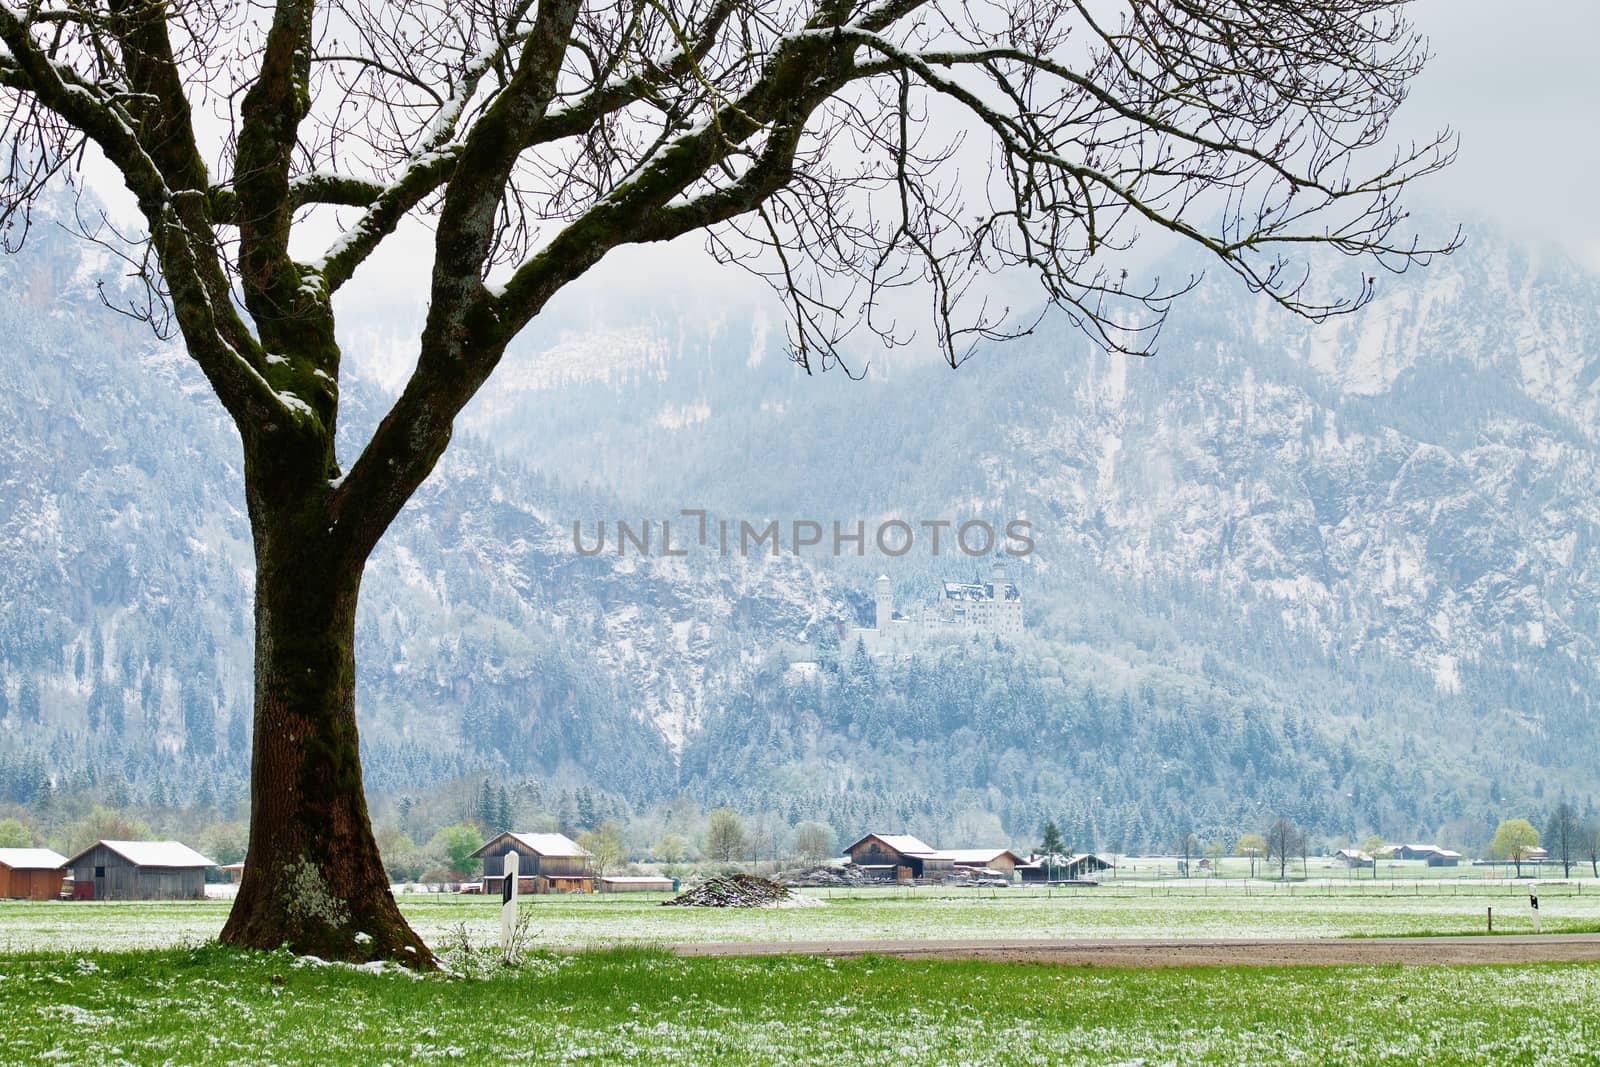 Tree in snowy meadows, april weather. Cold and damp by rdonar2